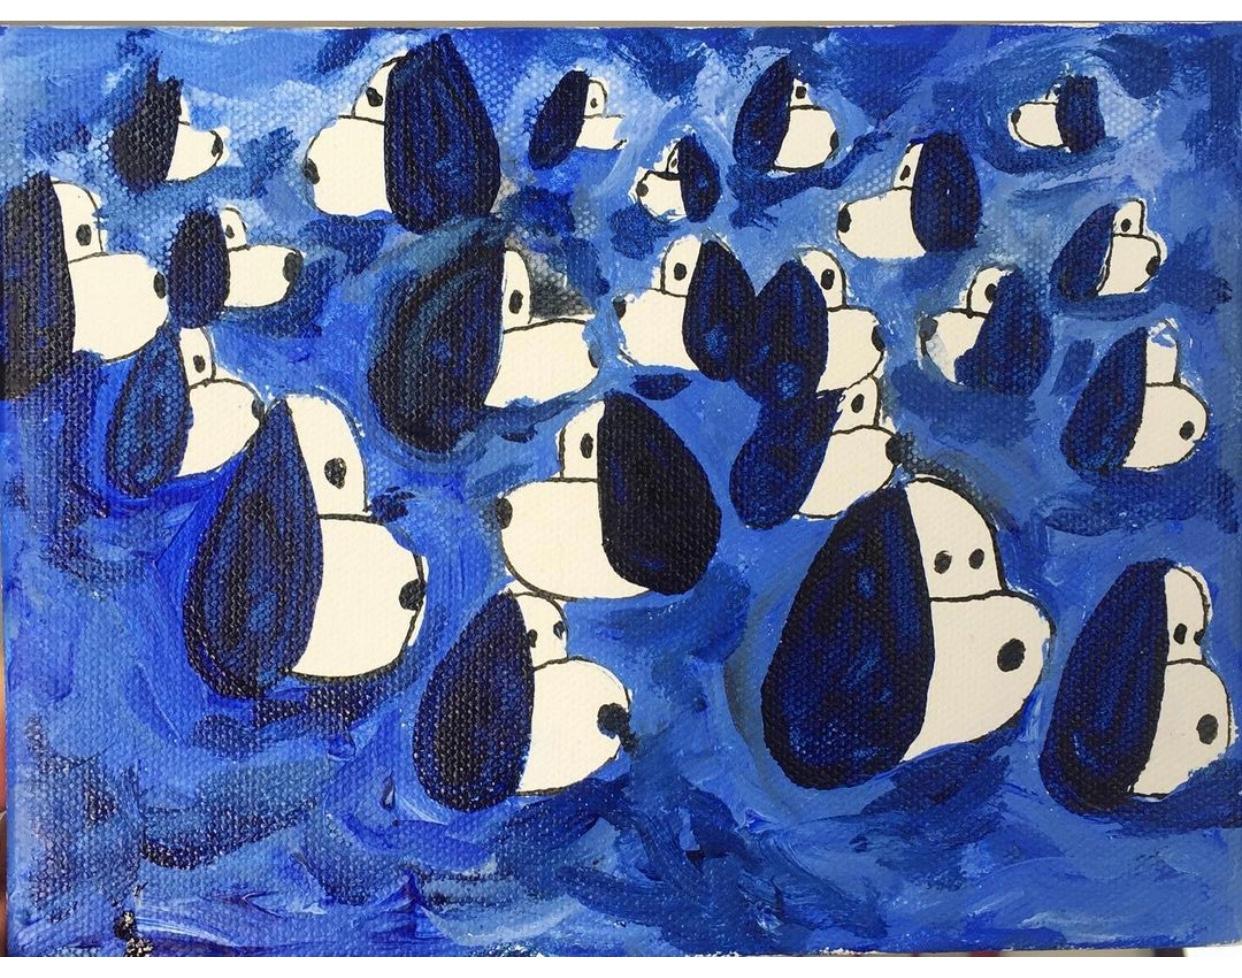 Snoopies in the Sea small painting on canvas. - Painting by Nina Bovasso